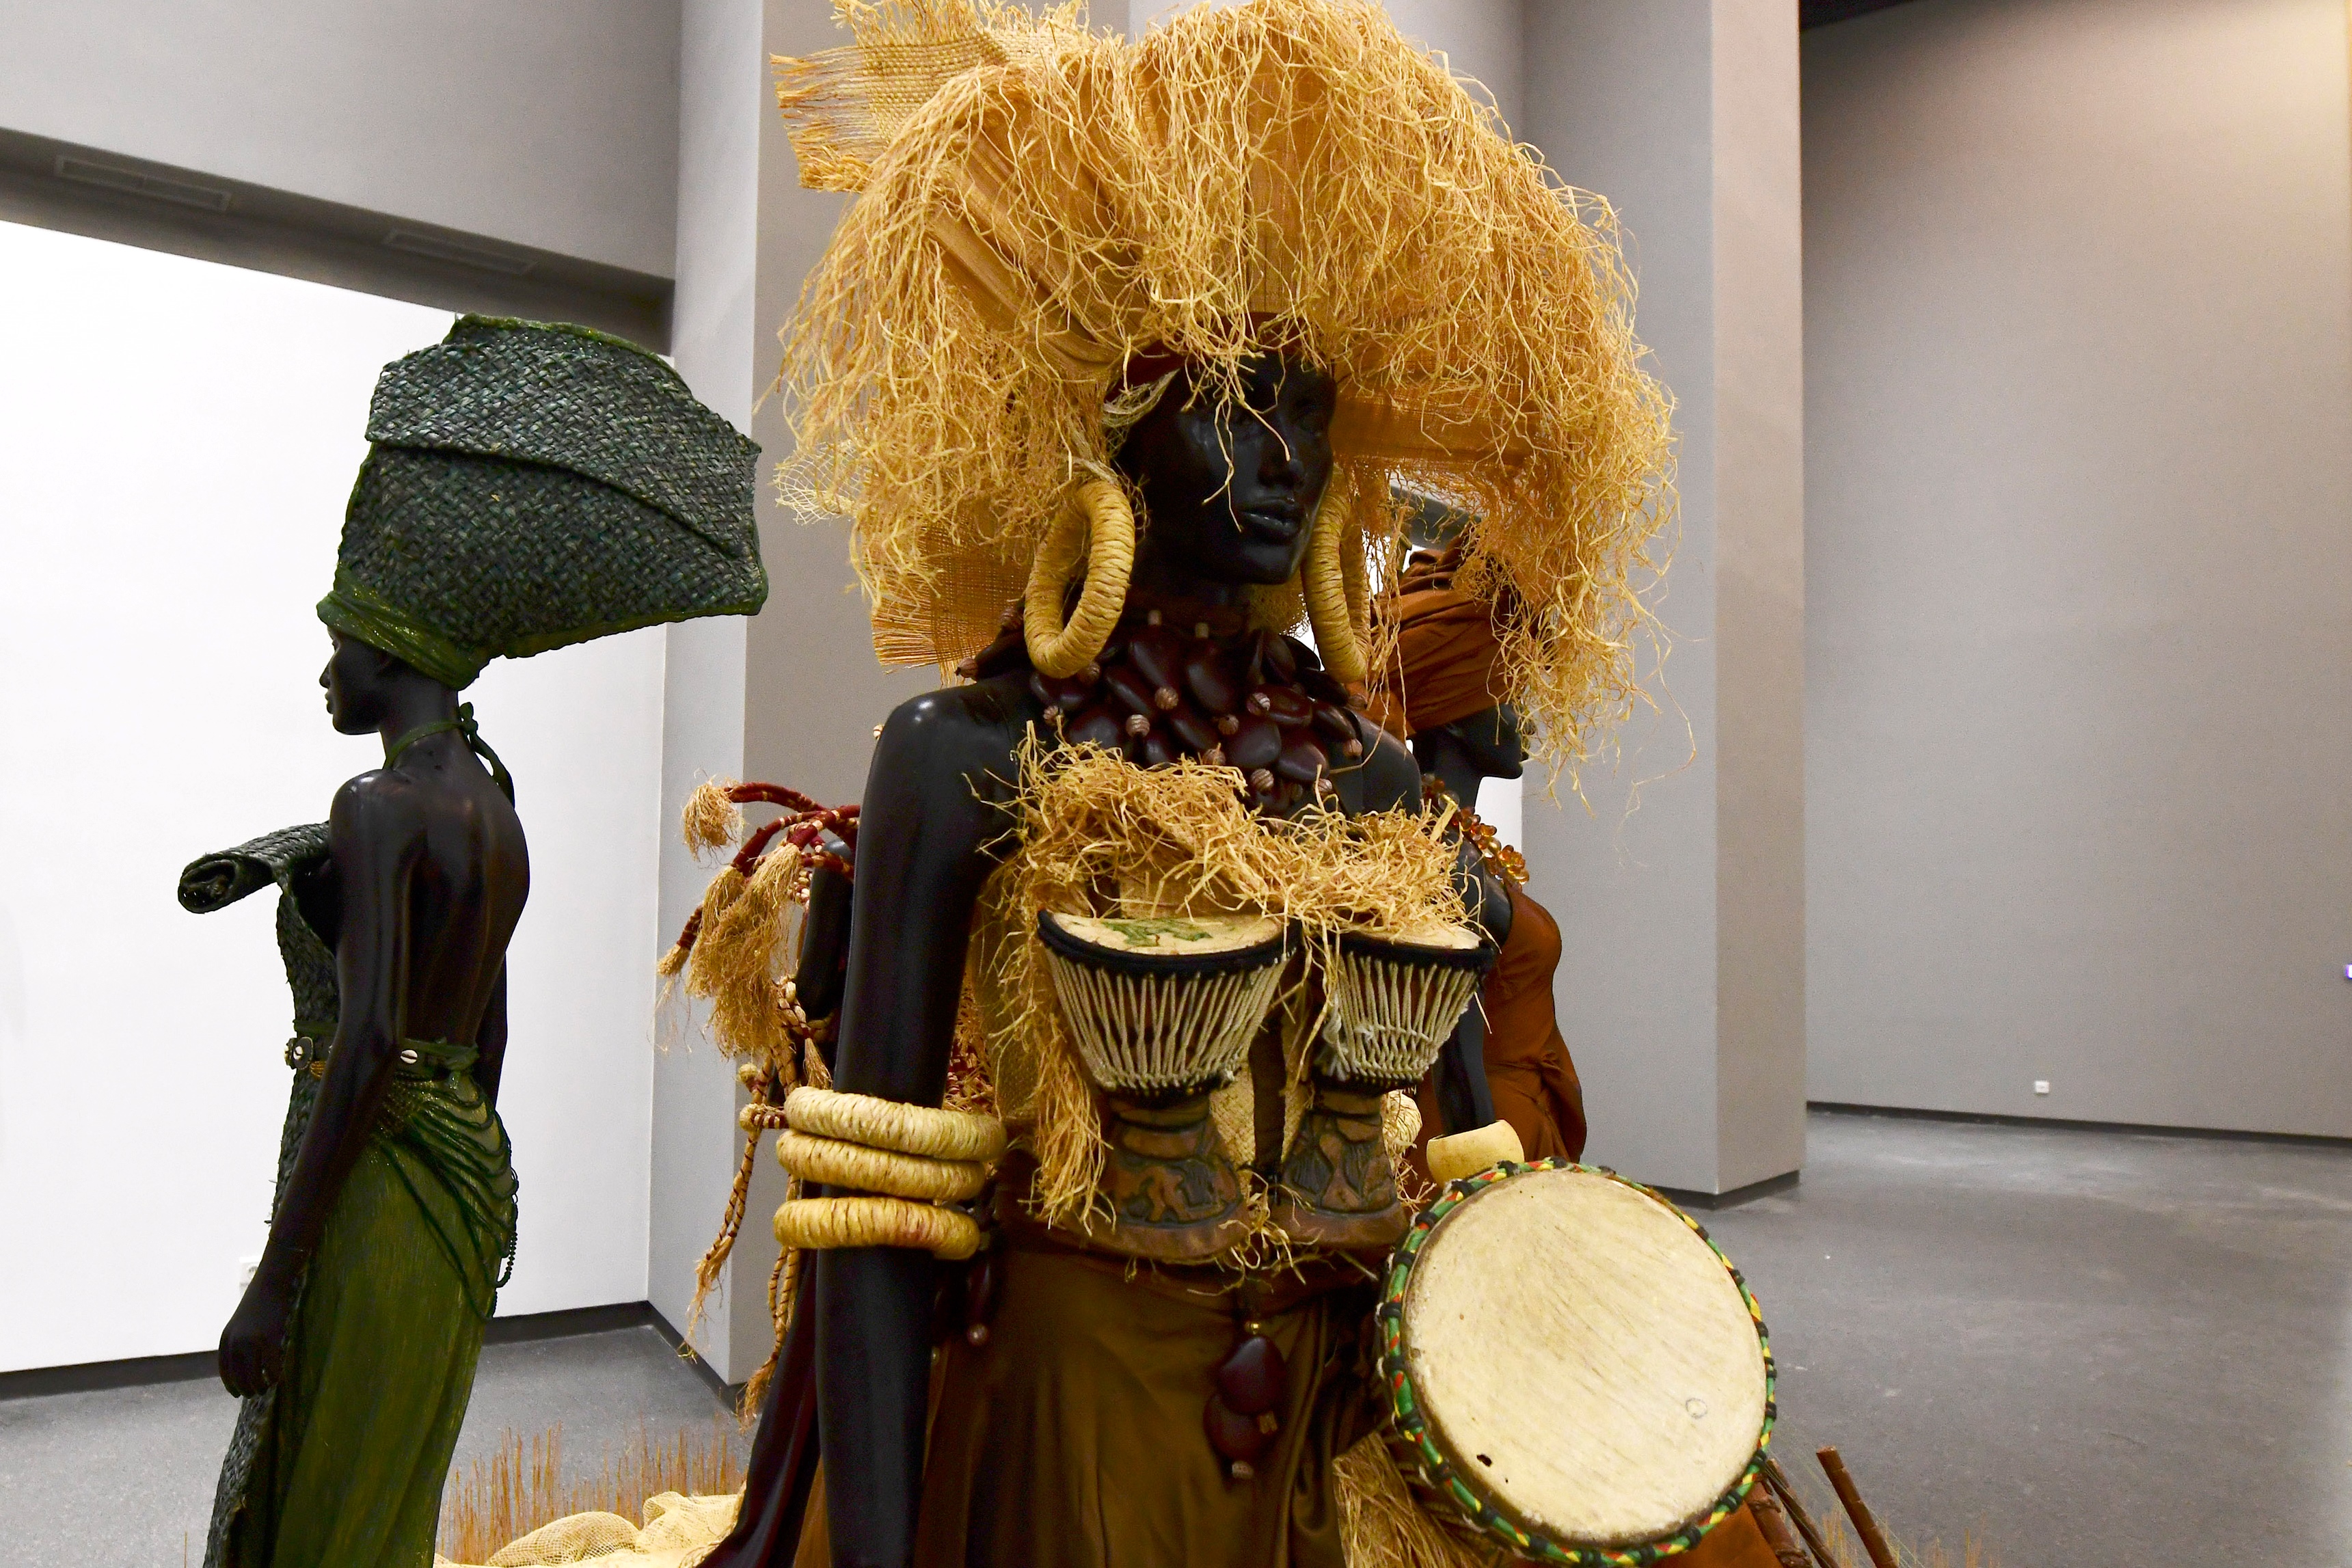 'Largest Museum Of Black Culture' With Over 18,000 Pieces Of Art Opens In Senegal